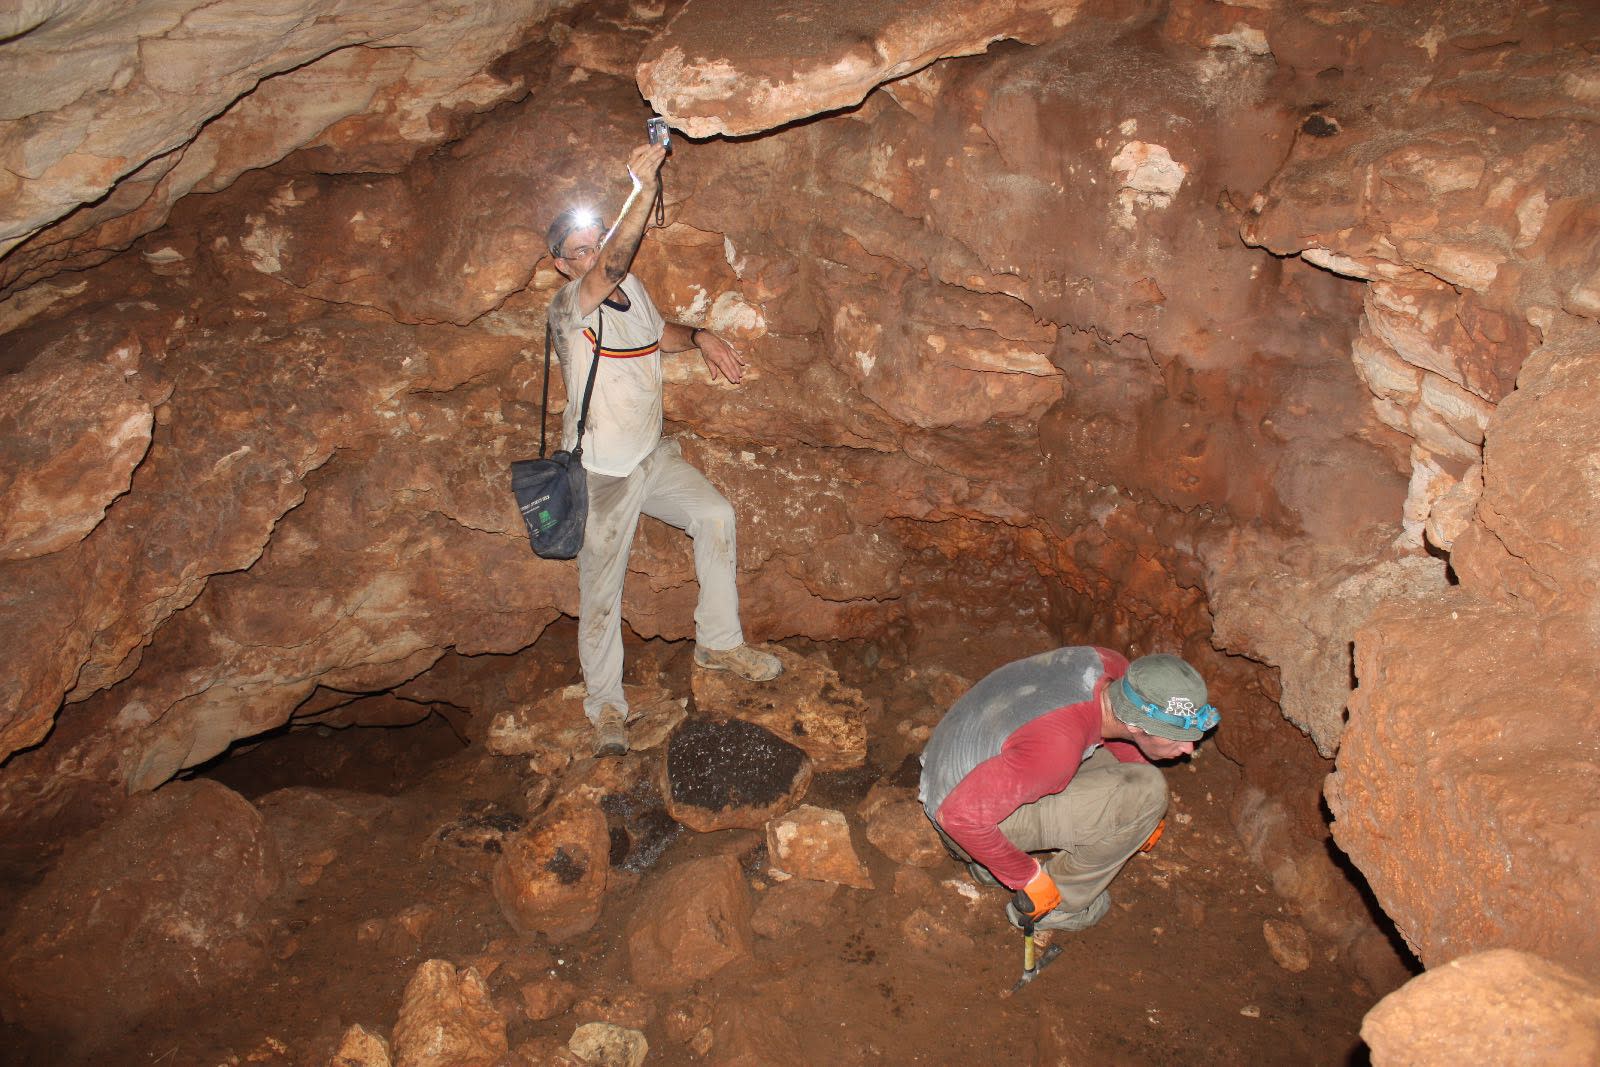 Archeological teams in the Qibya cave 30 kilometers northwest of Ramallah as part of the "Southern Samaria Survey" project. (COGAT SPOKESMAN)